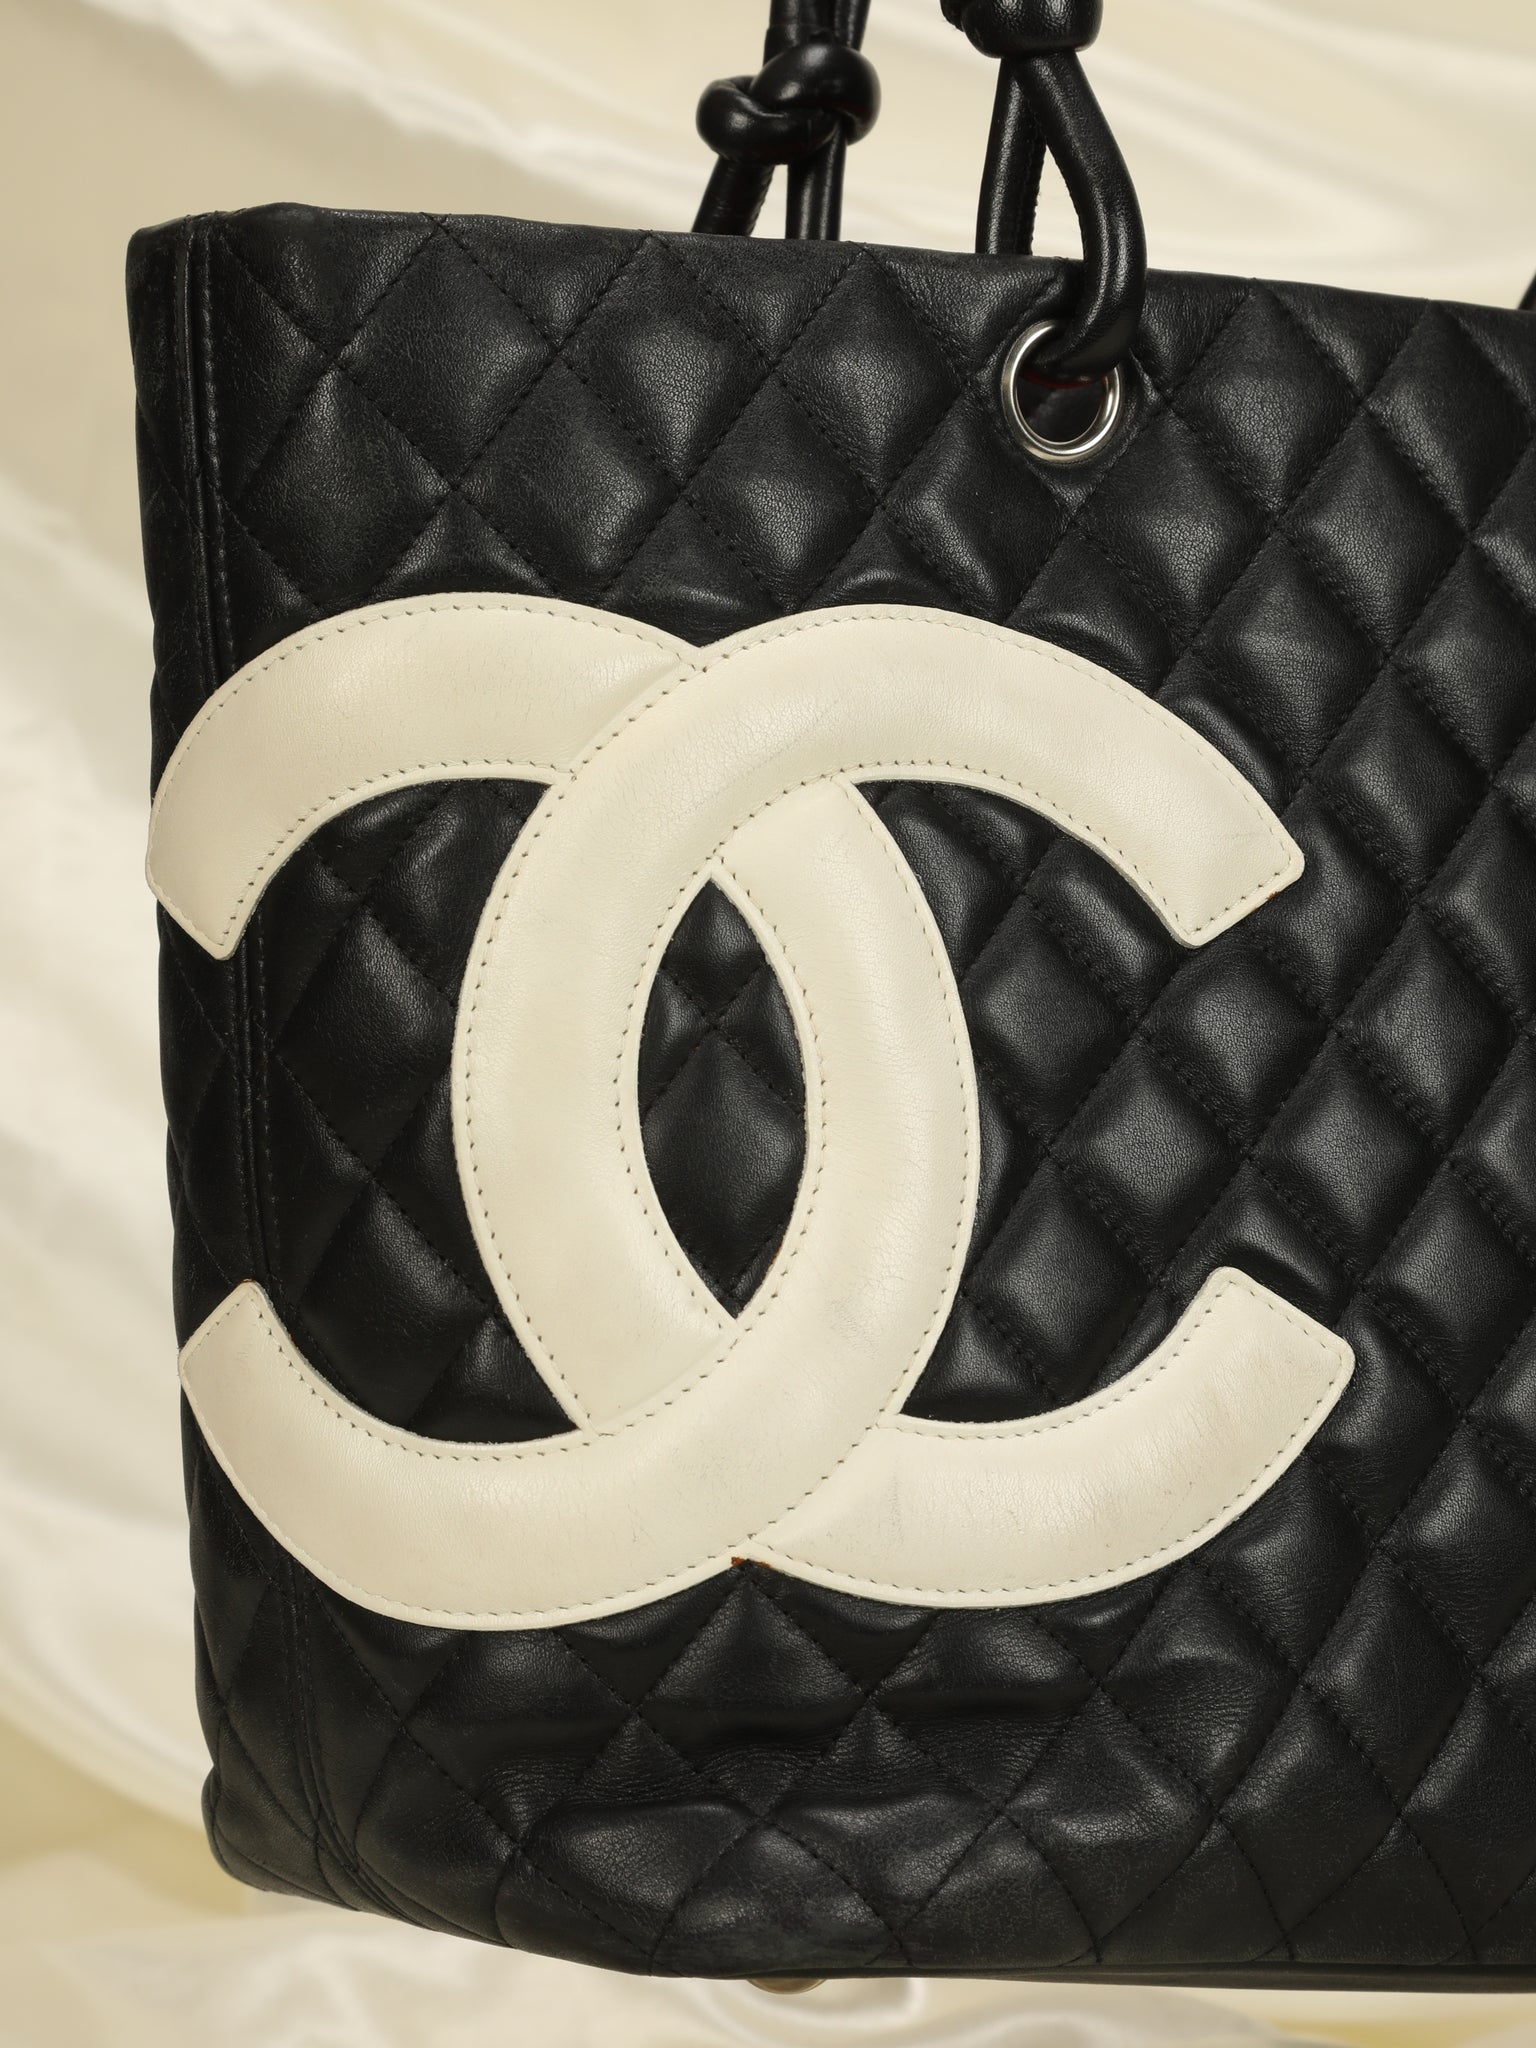 CHANEL, Bags, Chanel Cambon Tote Bag In Olive Green Lamb Leather And  Snake Skin Cc Logo